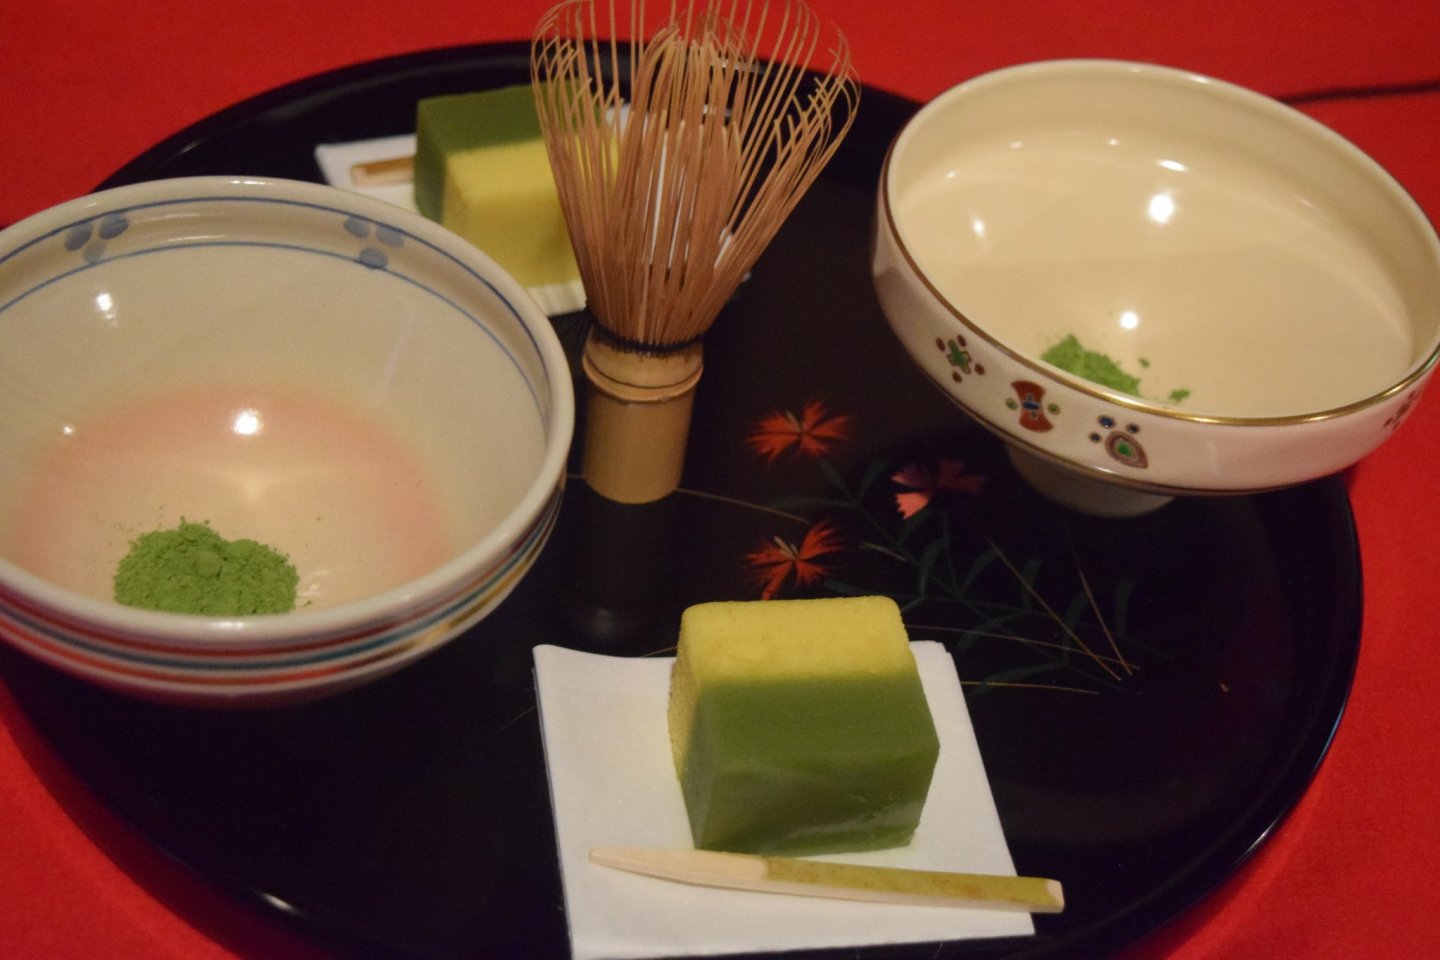 From the beginner\'s workshop, where you could learn how to whisk your own cup of matcha